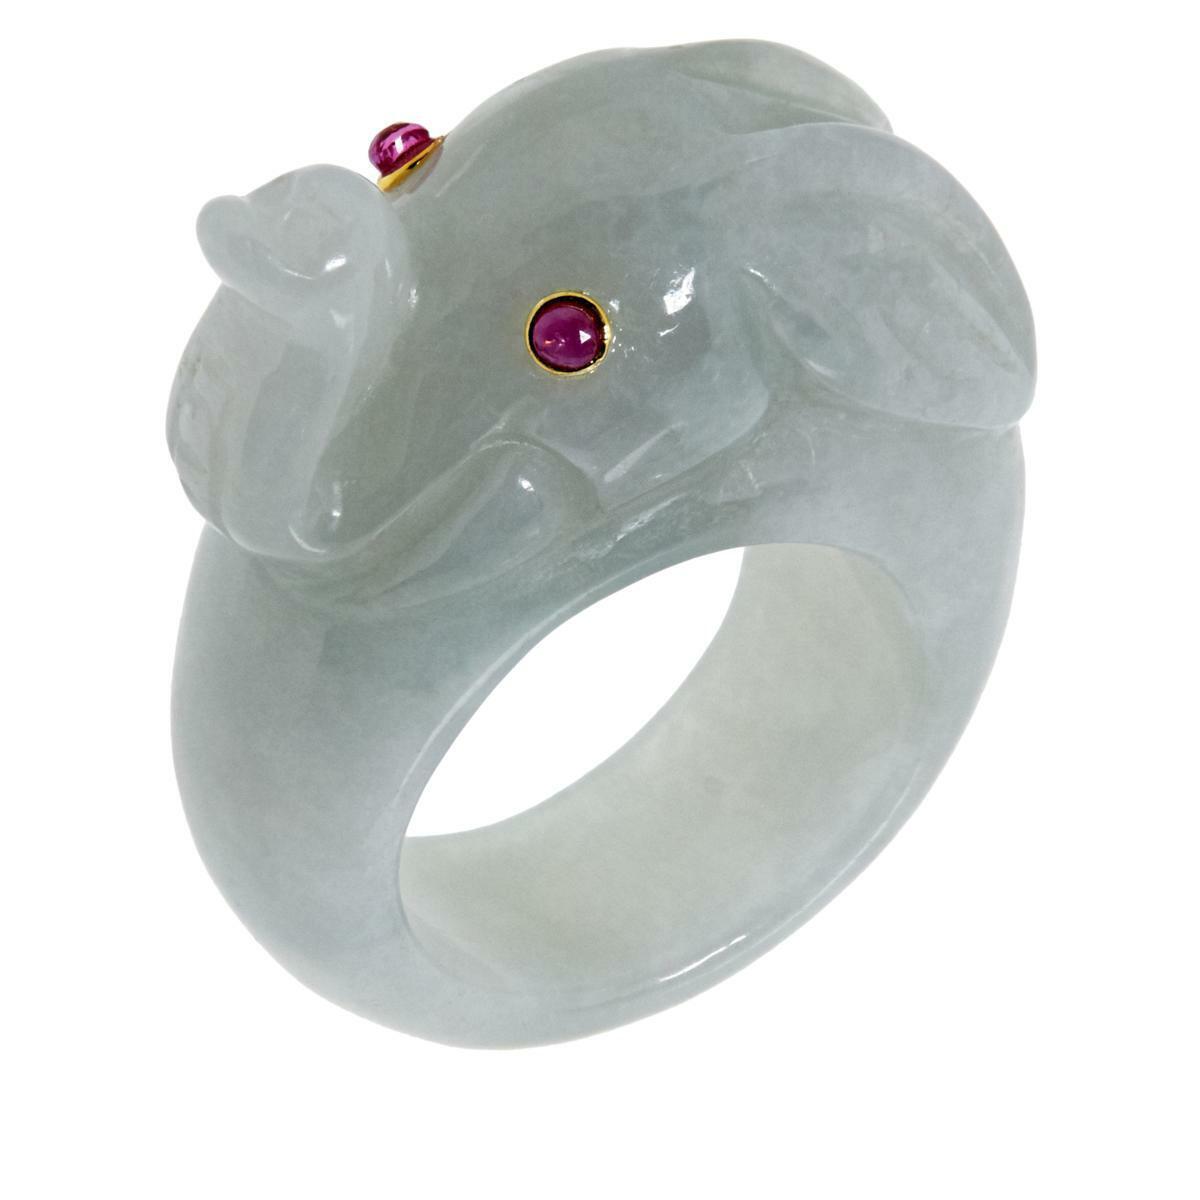 HSN - Jade of Yesteryear Gold-plated Elephant Carved Ring, Size 8